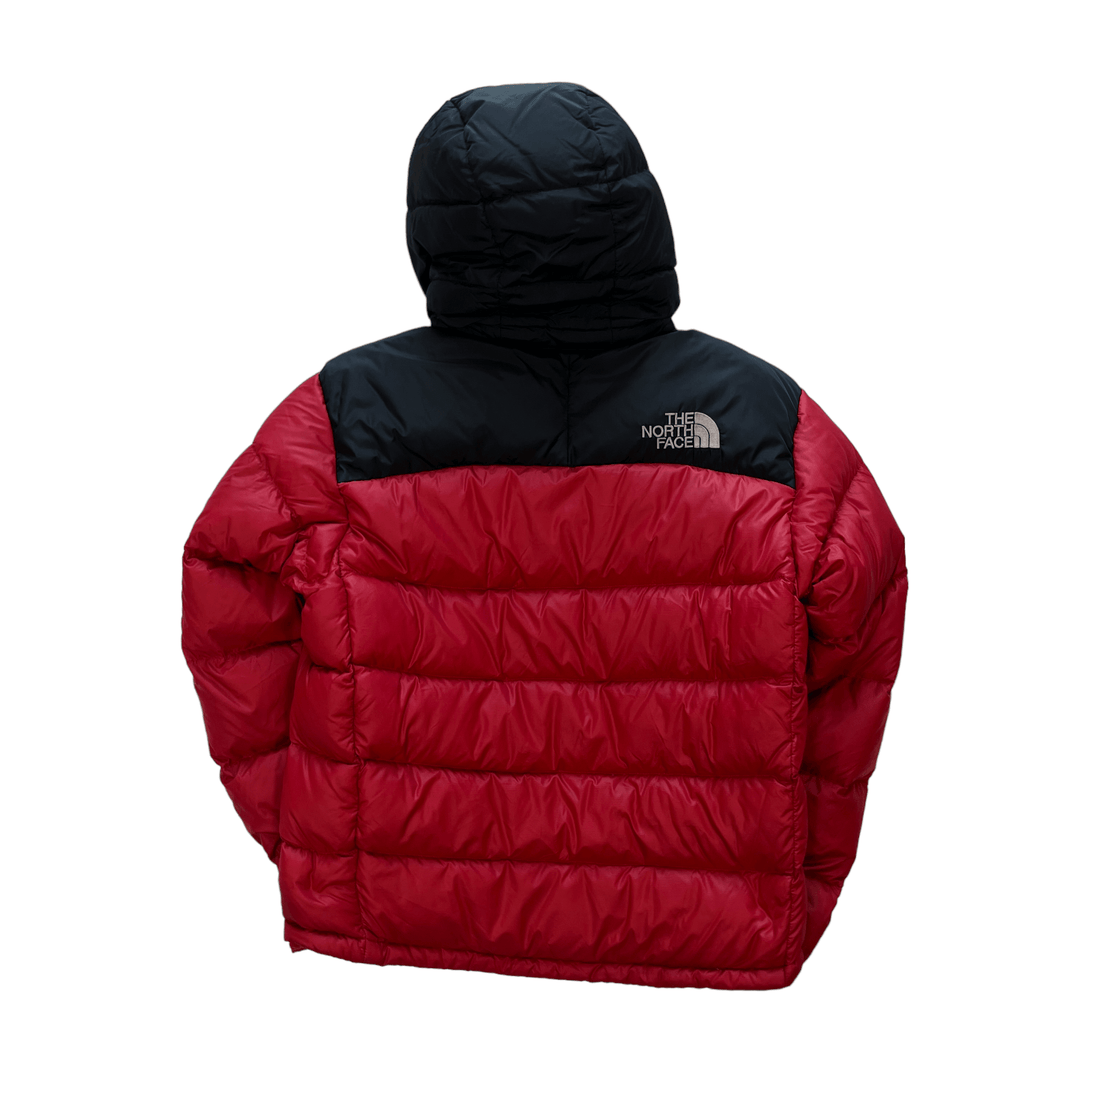 Vintage Red + Black The North Face (TNF) Puffer Coat - Small - The Streetwear Studio